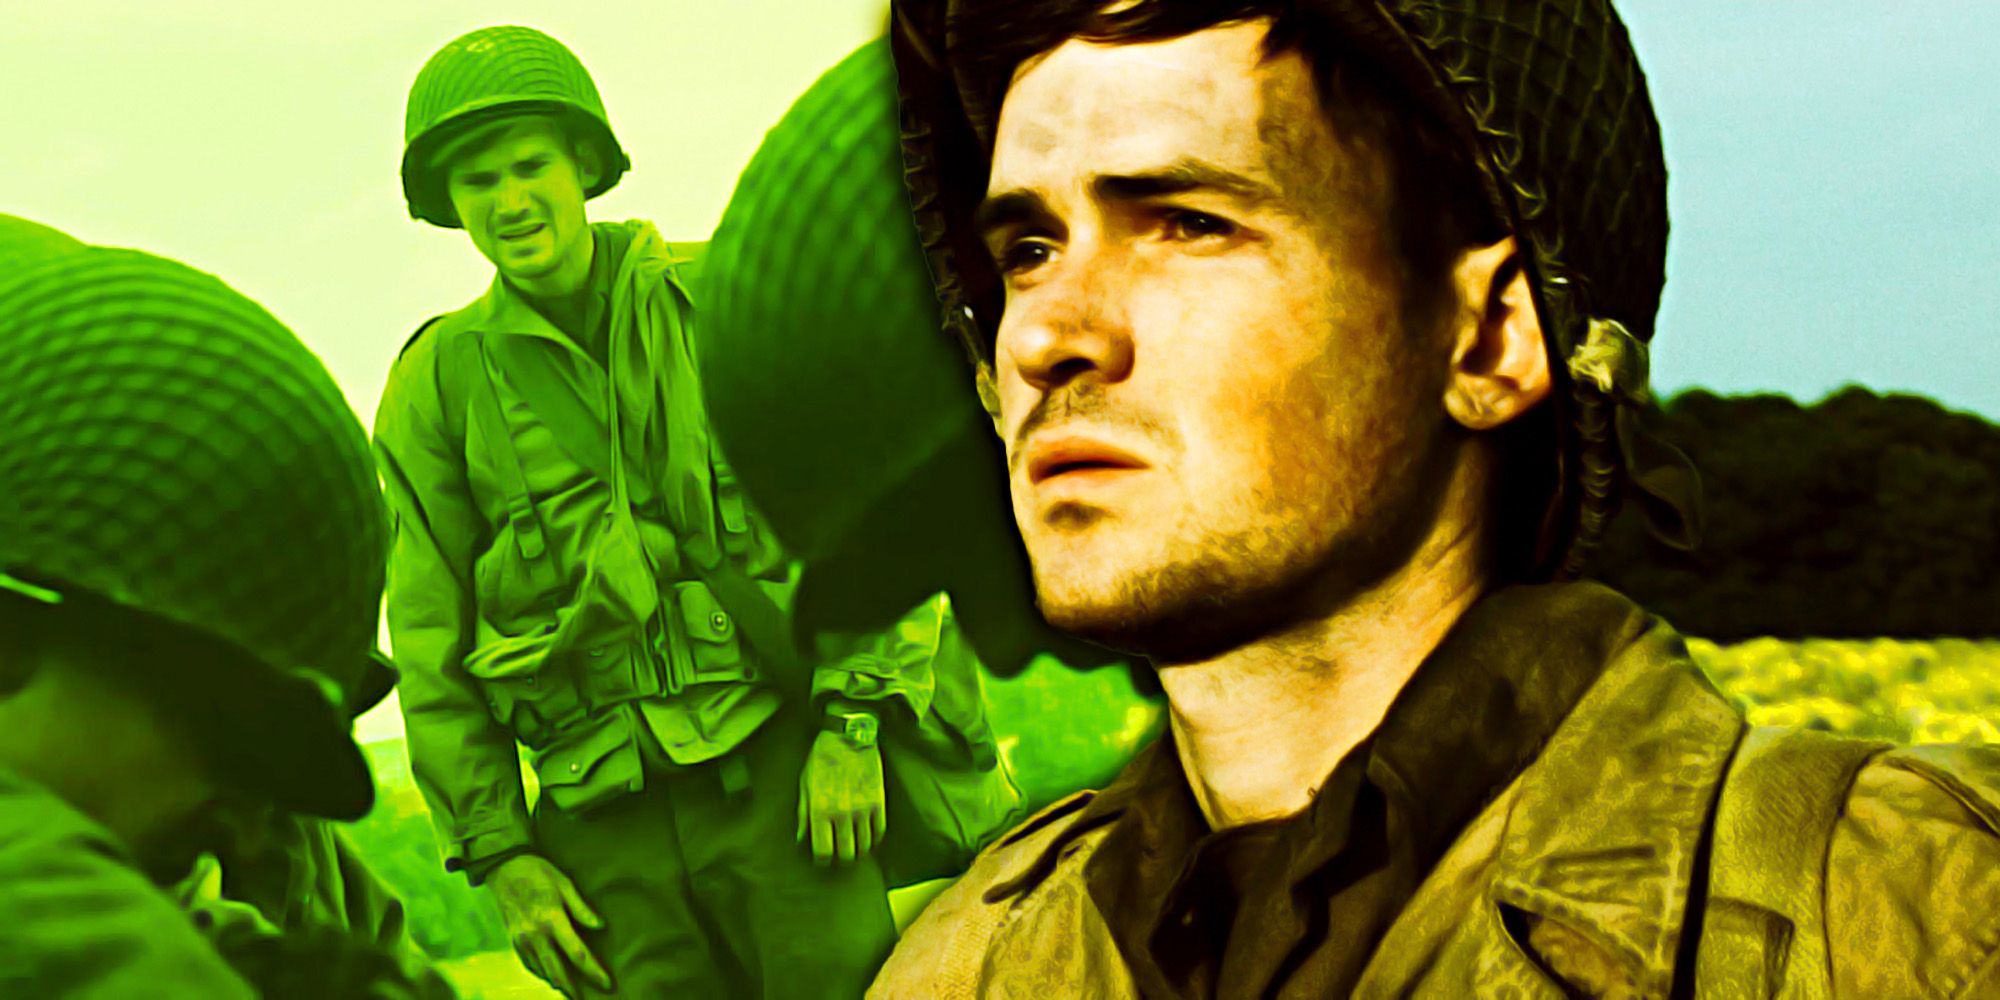 saving-private-ryan-upham-coward-controversy-explained